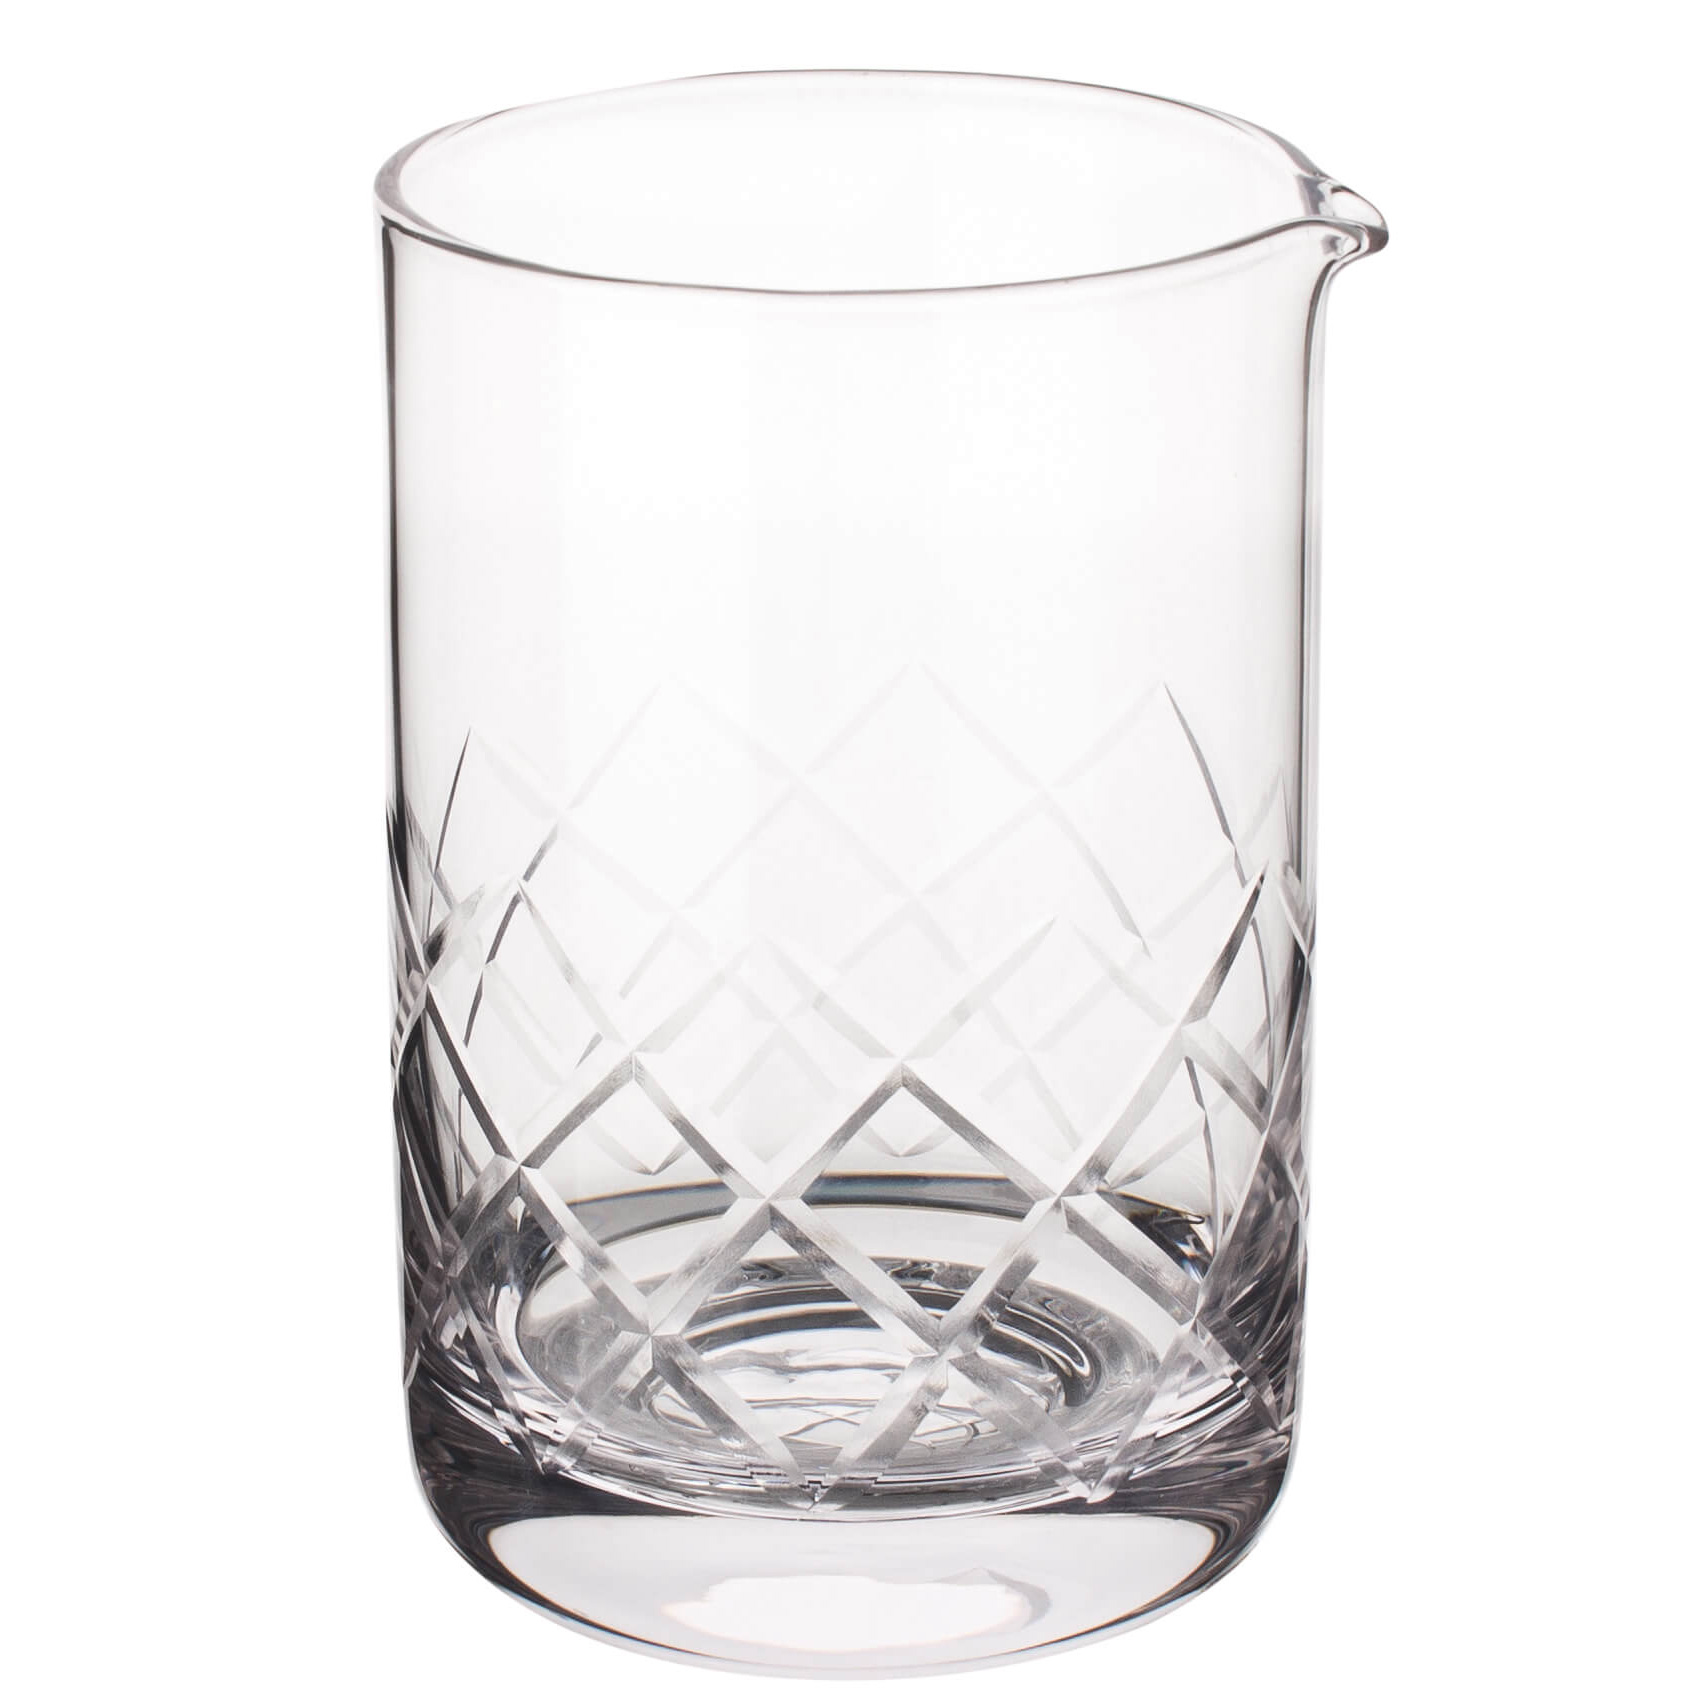 Mixing glass Diamond cut, seamless with pouring lip, Prime Bar - approx. 600ml